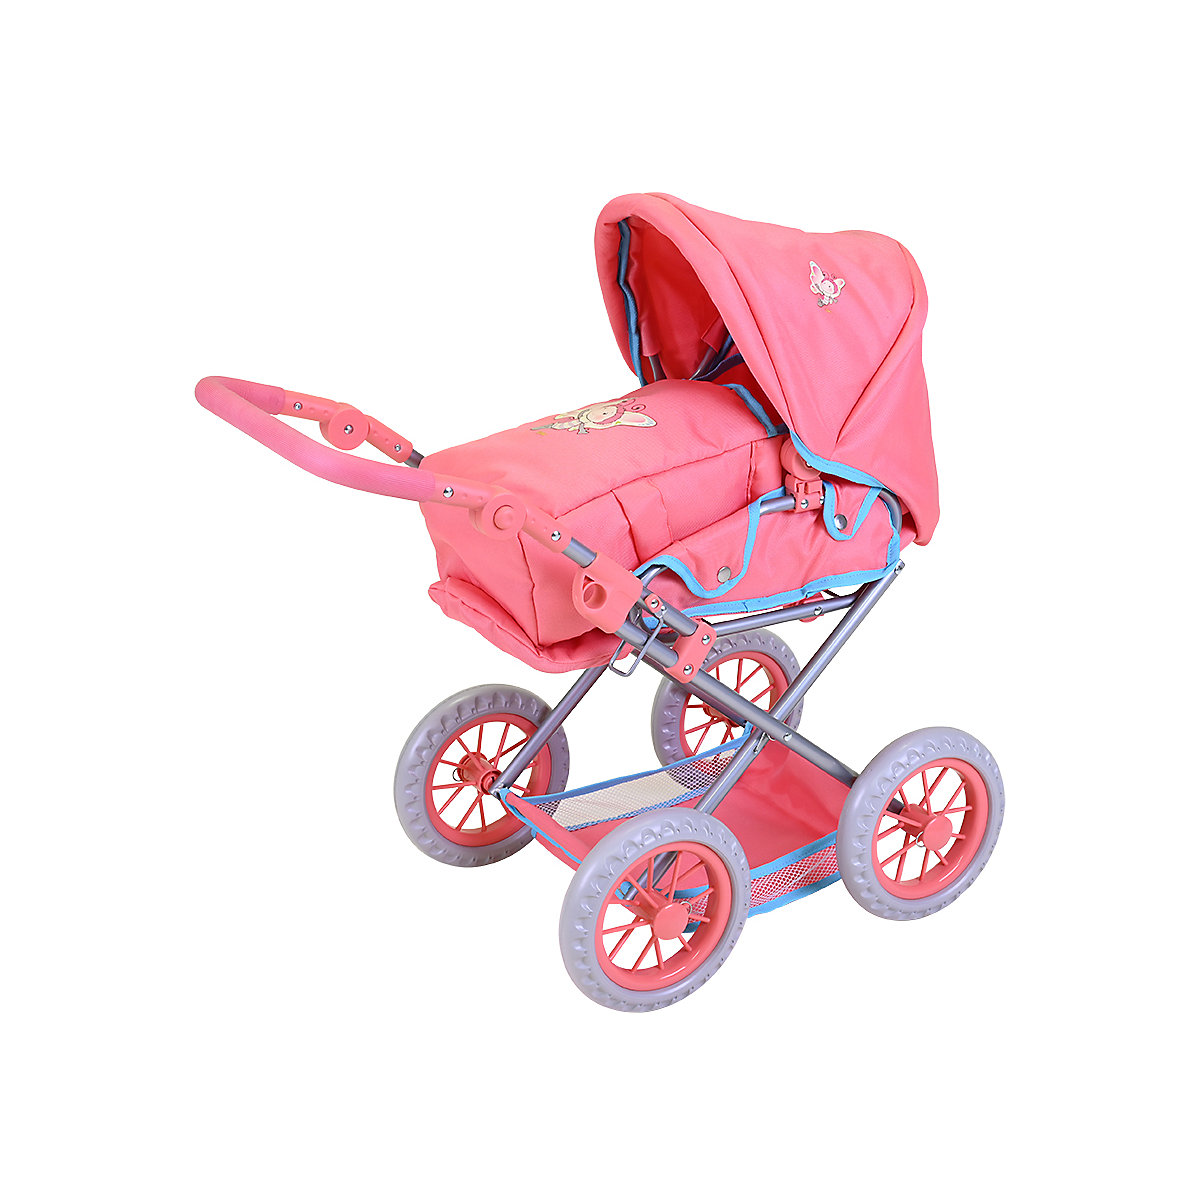 KNORRTOYS.COM NICI Spring Puppenwagen Ruby